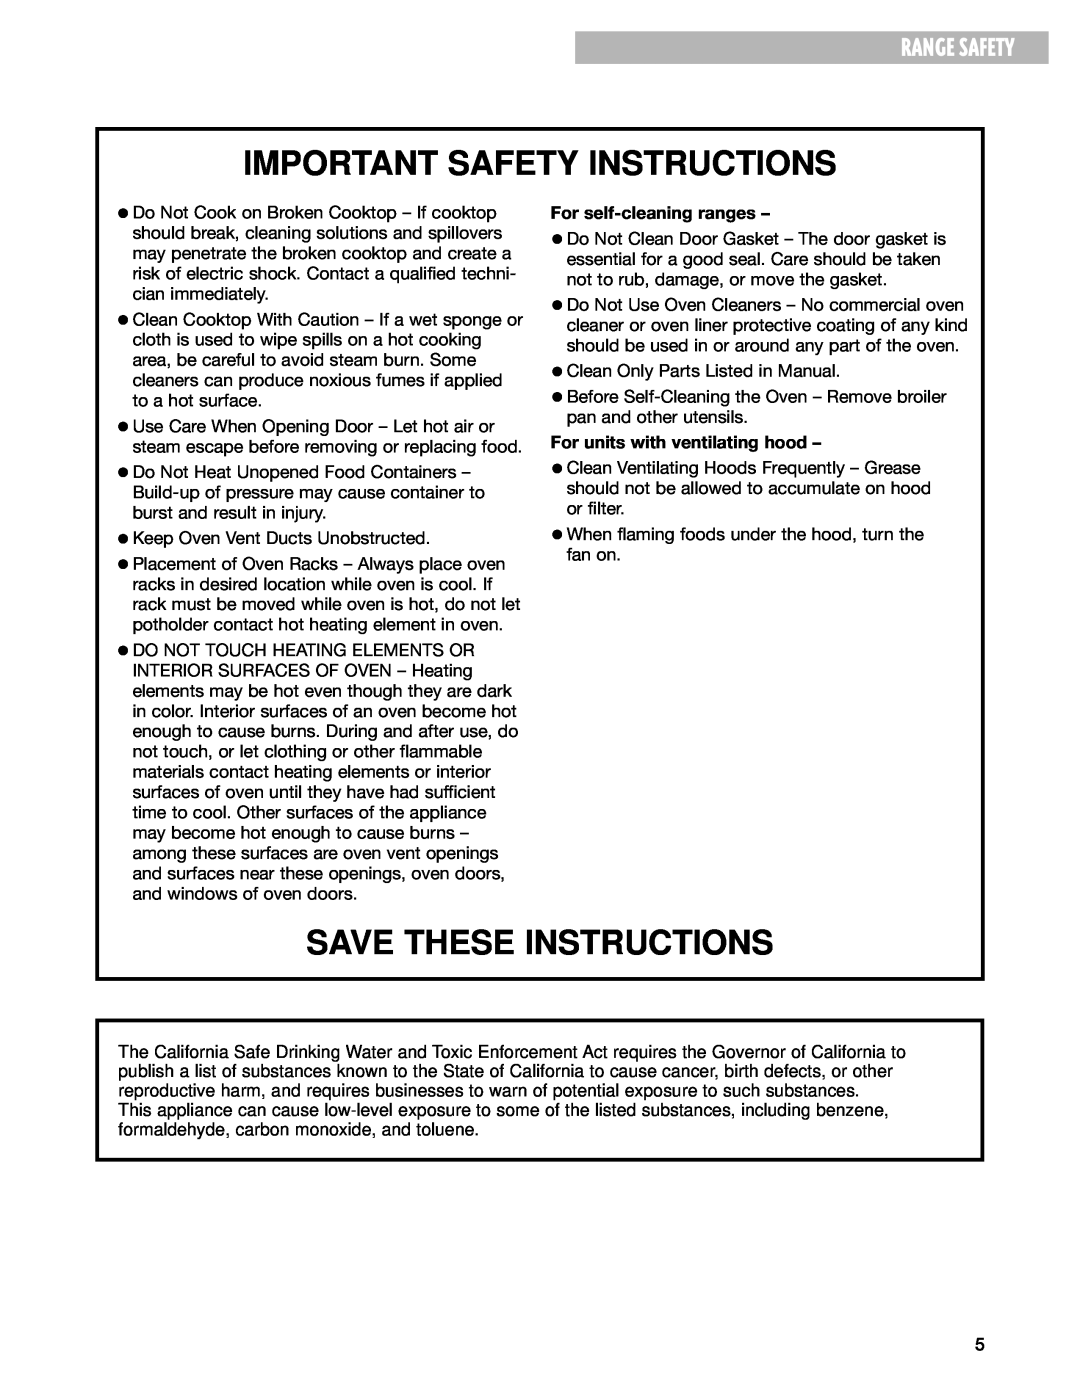 Whirlpool RF199LXH warranty Important Safety Instructions, Save These Instructions, Range Safety, For self-cleaning ranges 